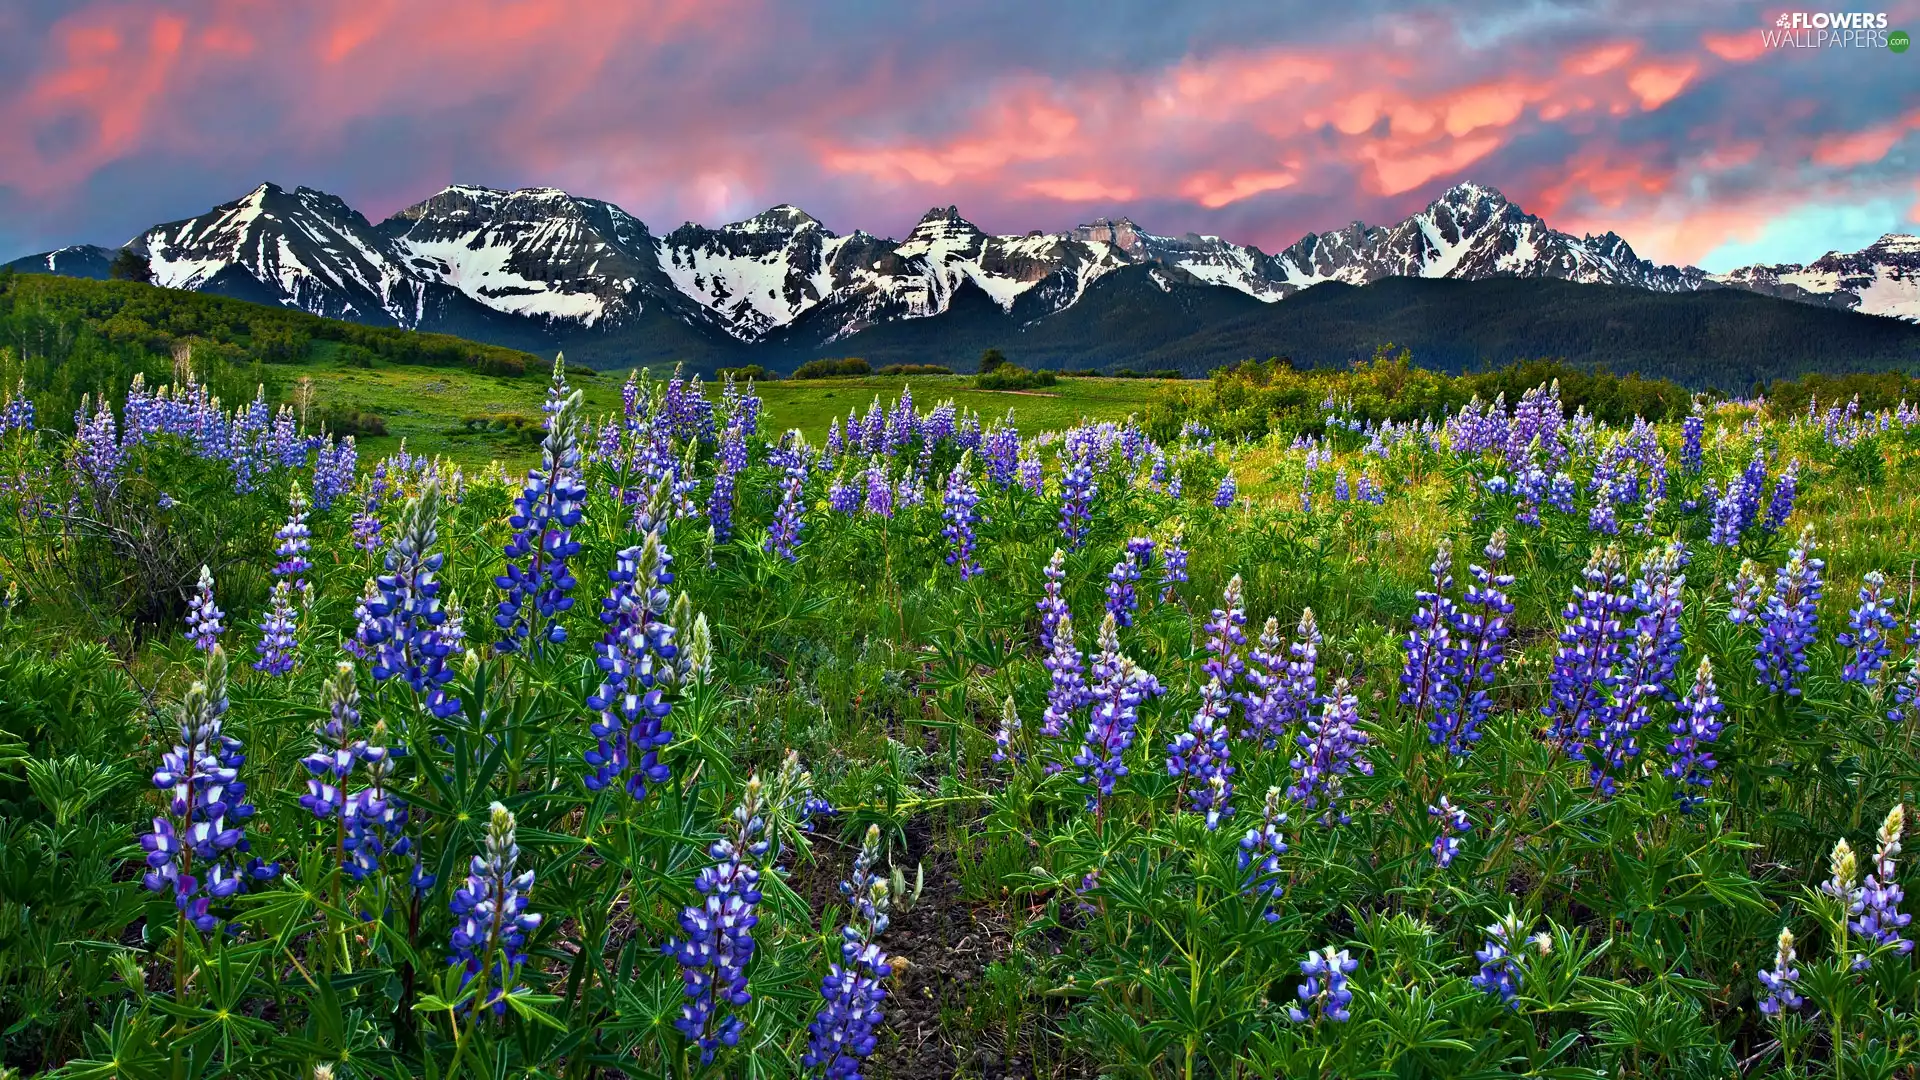 Meadow, lupine, Mountains, Flowers - Flowers wallpapers ...